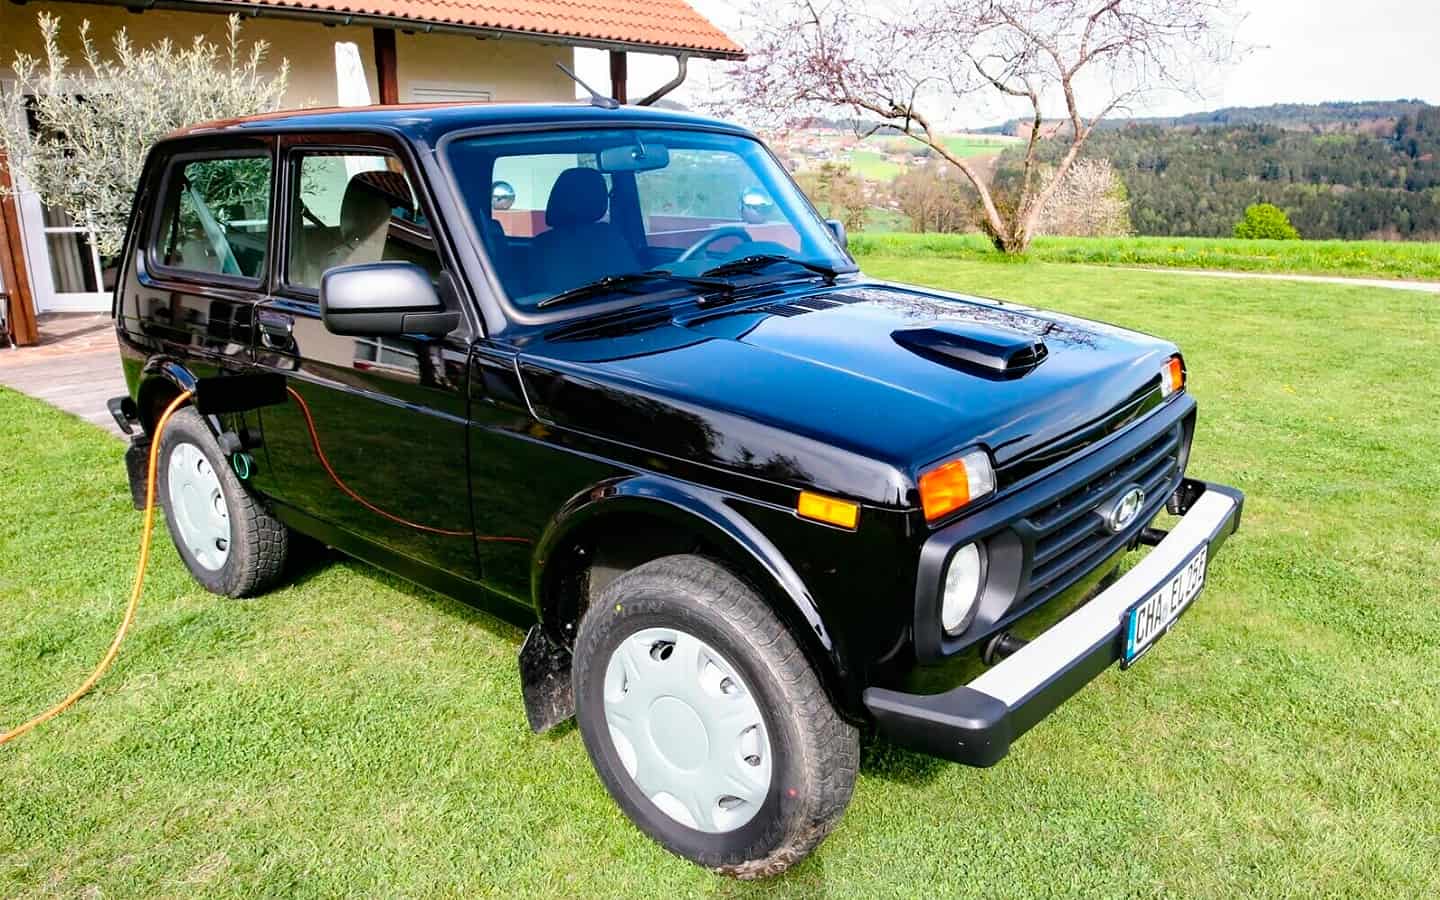 An electric Lada Niva has been developed in Germany. Photos and prices